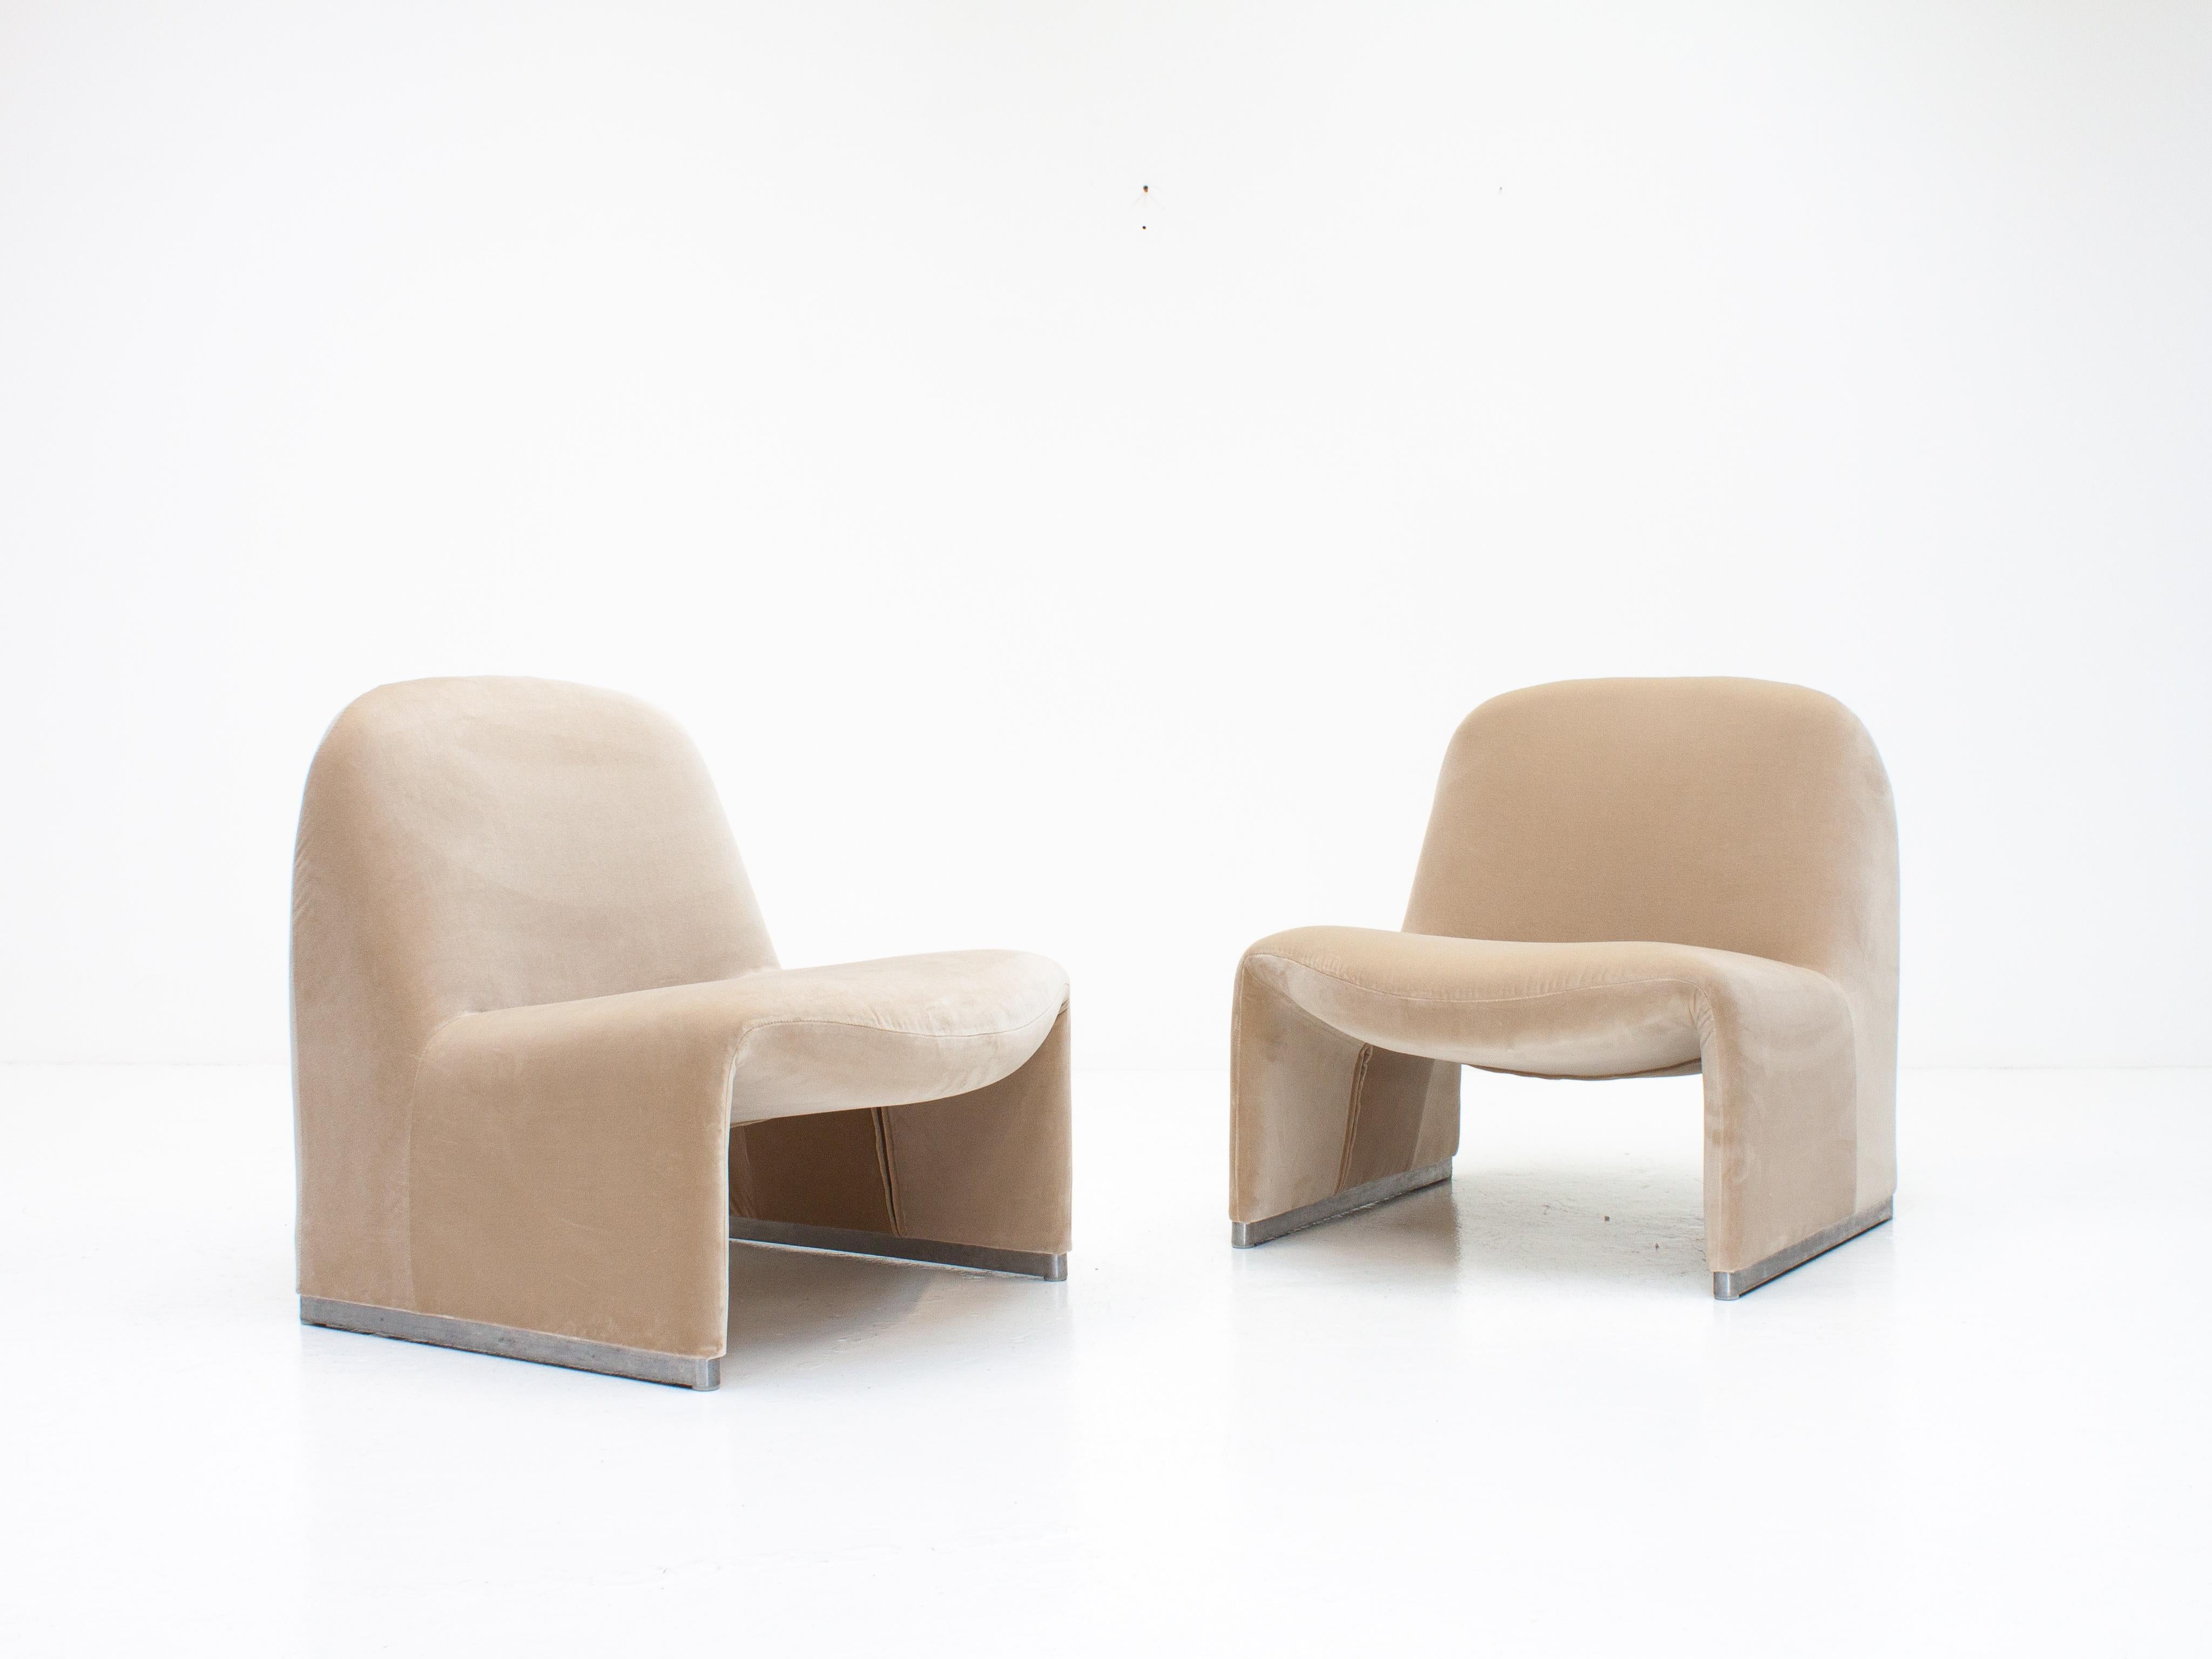 A pair of Giancarlo Piretti “Alky” chairs newly upholstered in Designers Guild linen colored velvet. 

Manufactured by Artifort in the 1970s.

The organic shape offers a minimal appearance but also comfort.

Foam restored where required and entirely